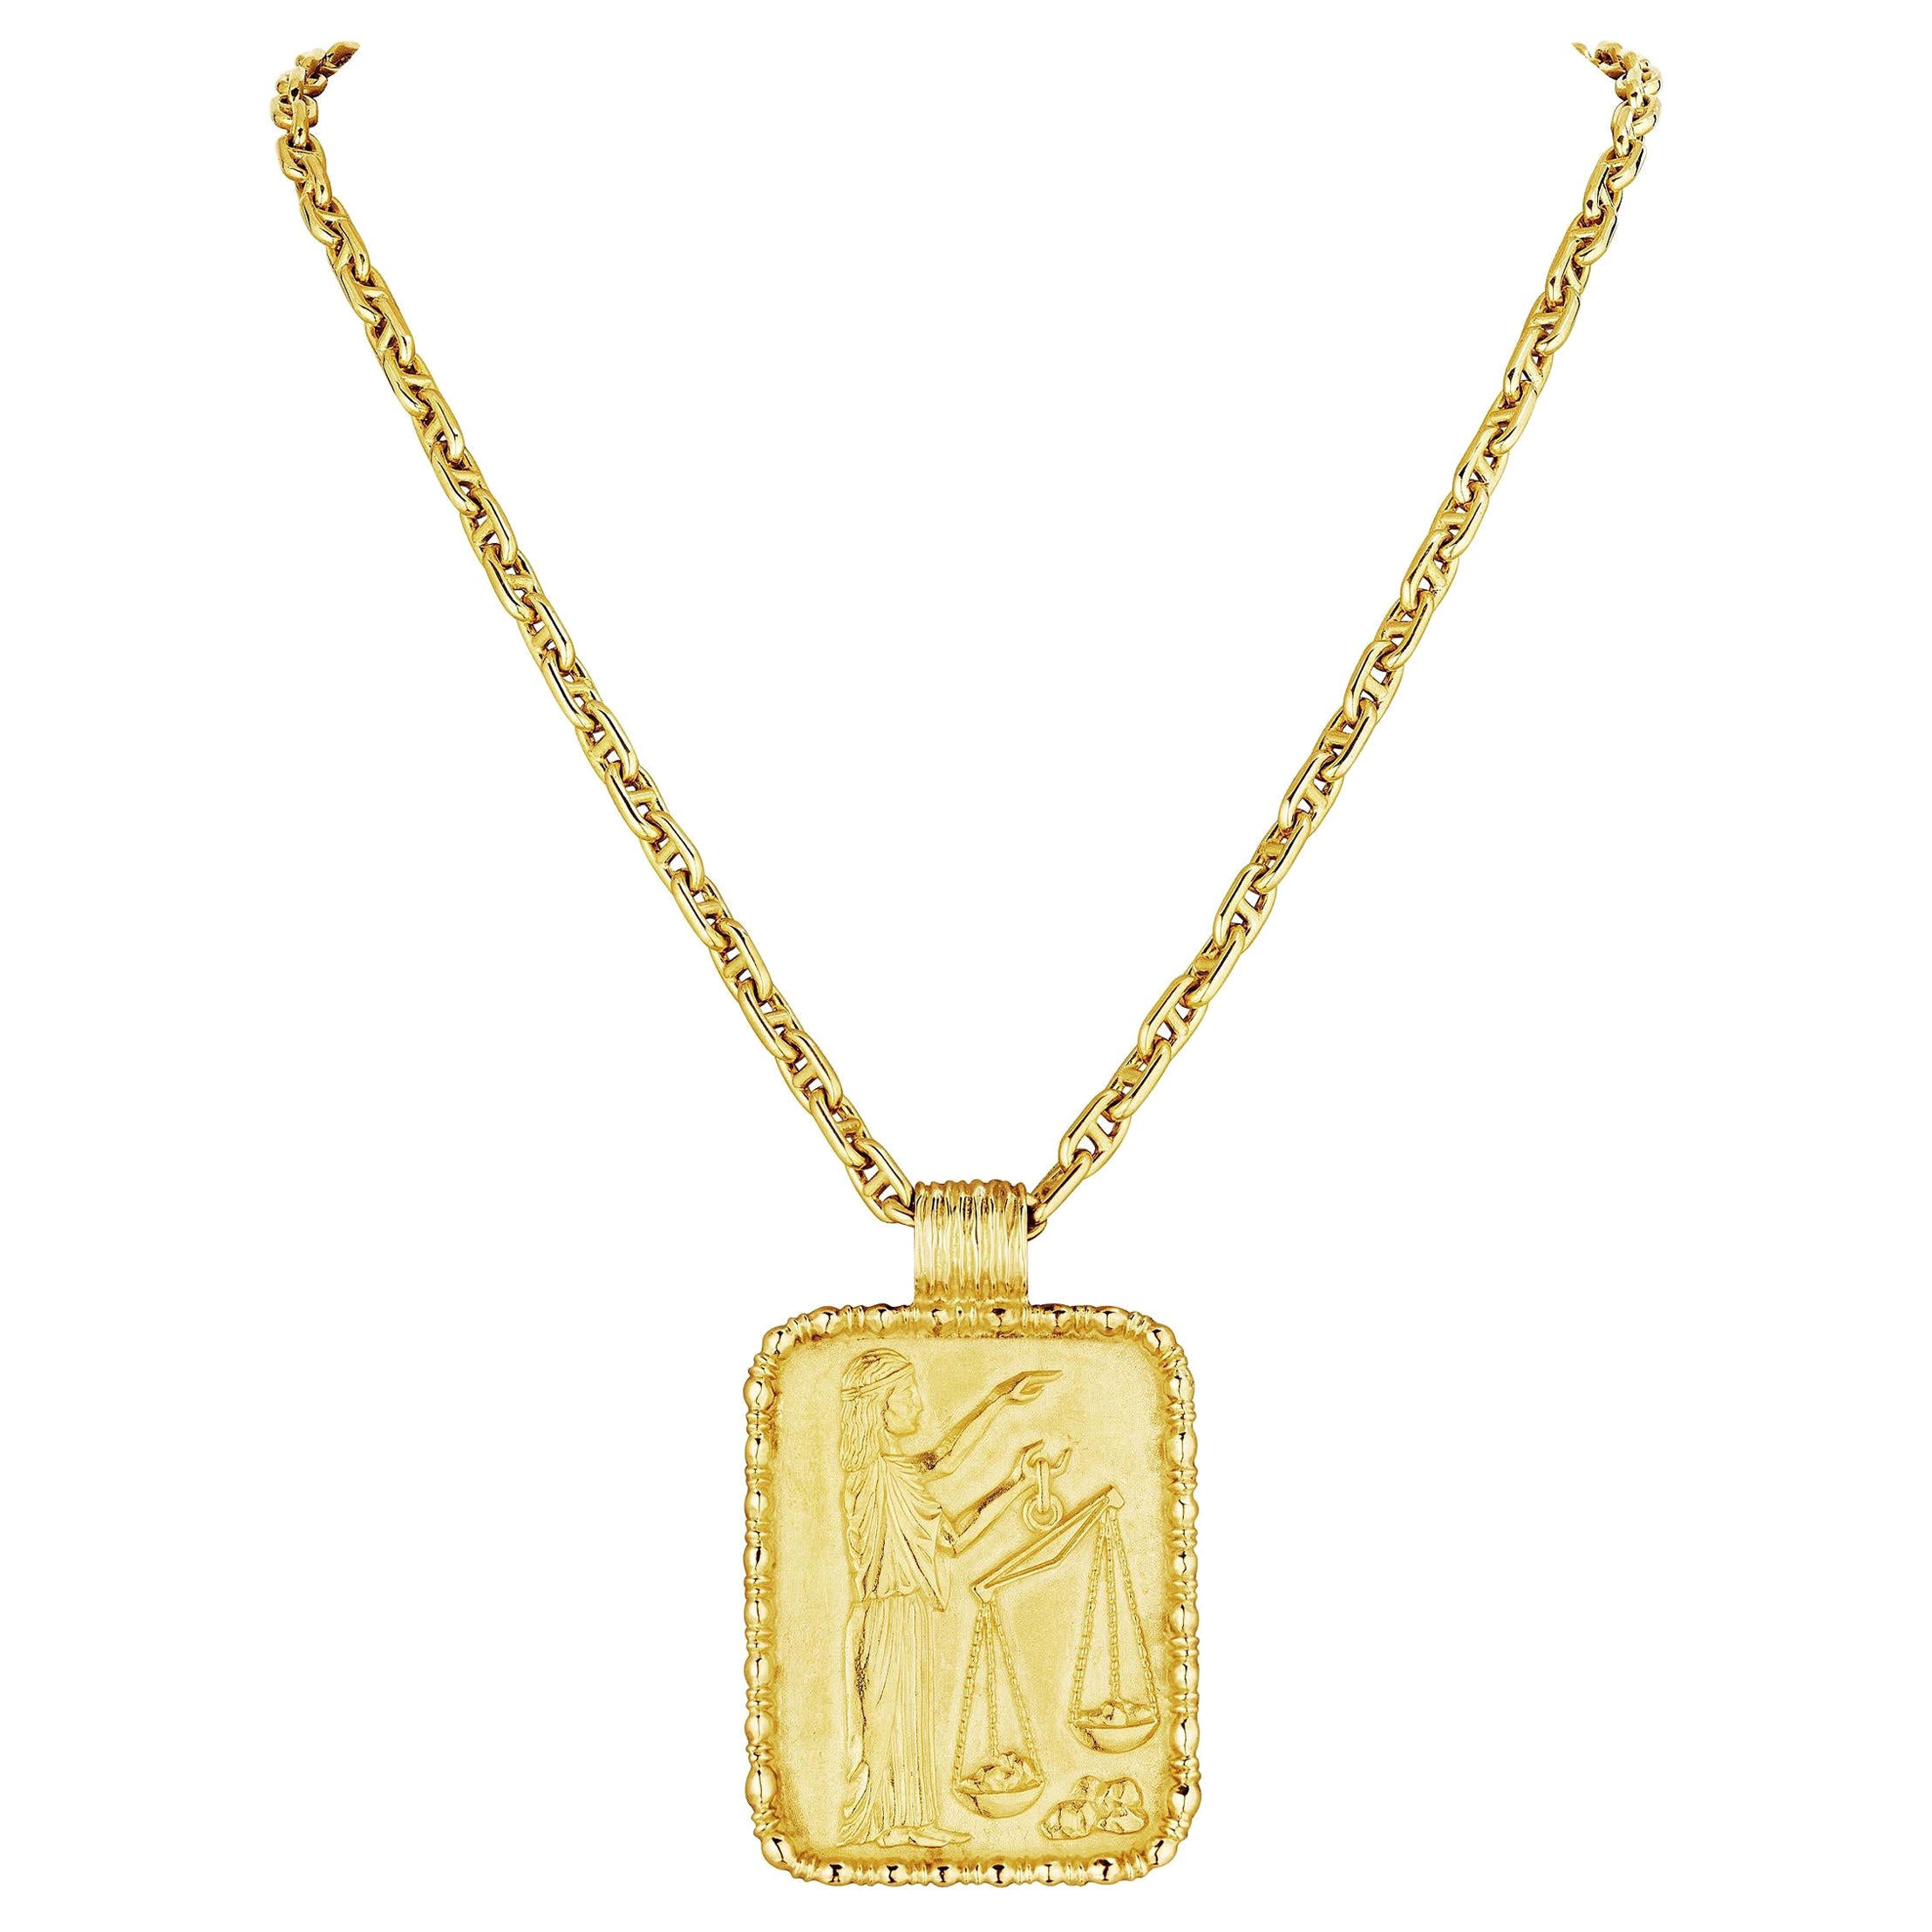 Fred necklace, Tr è fle, gold and diamonds